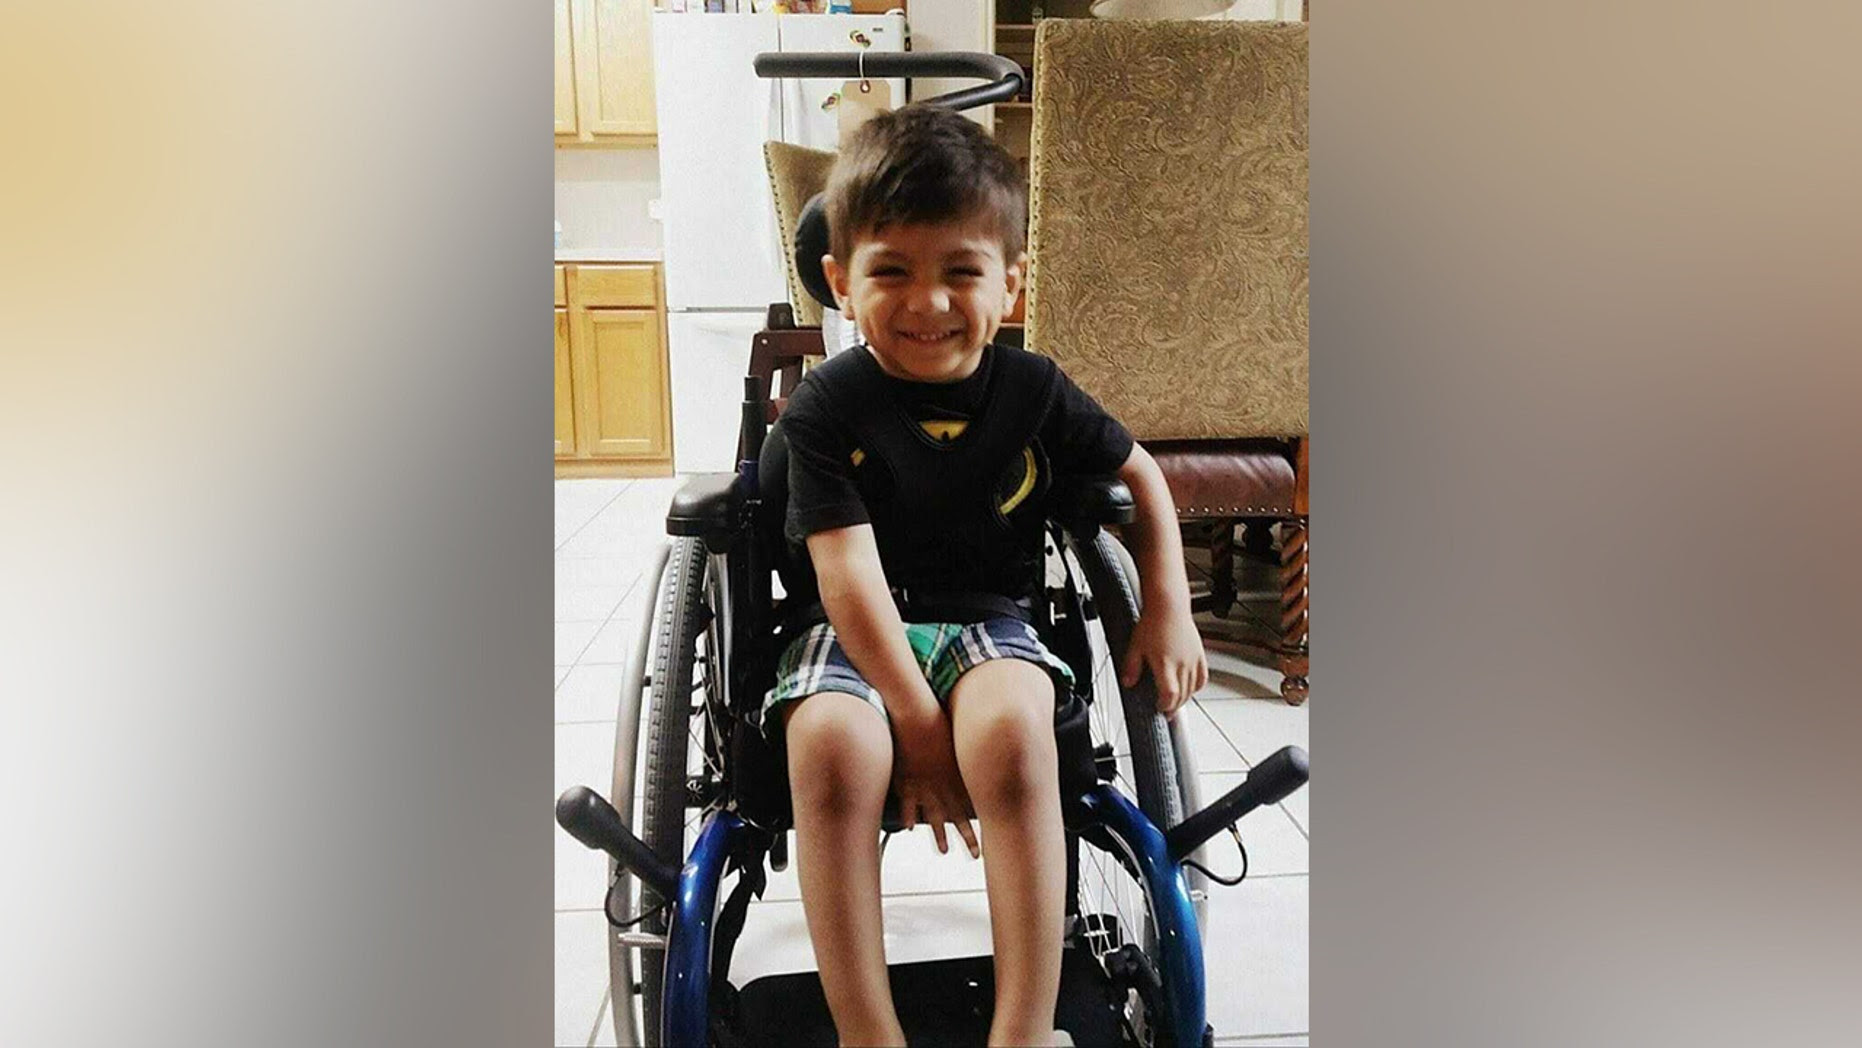 Seven-year-old with cerebral palsy saves his family from carbon monoxide poisoning